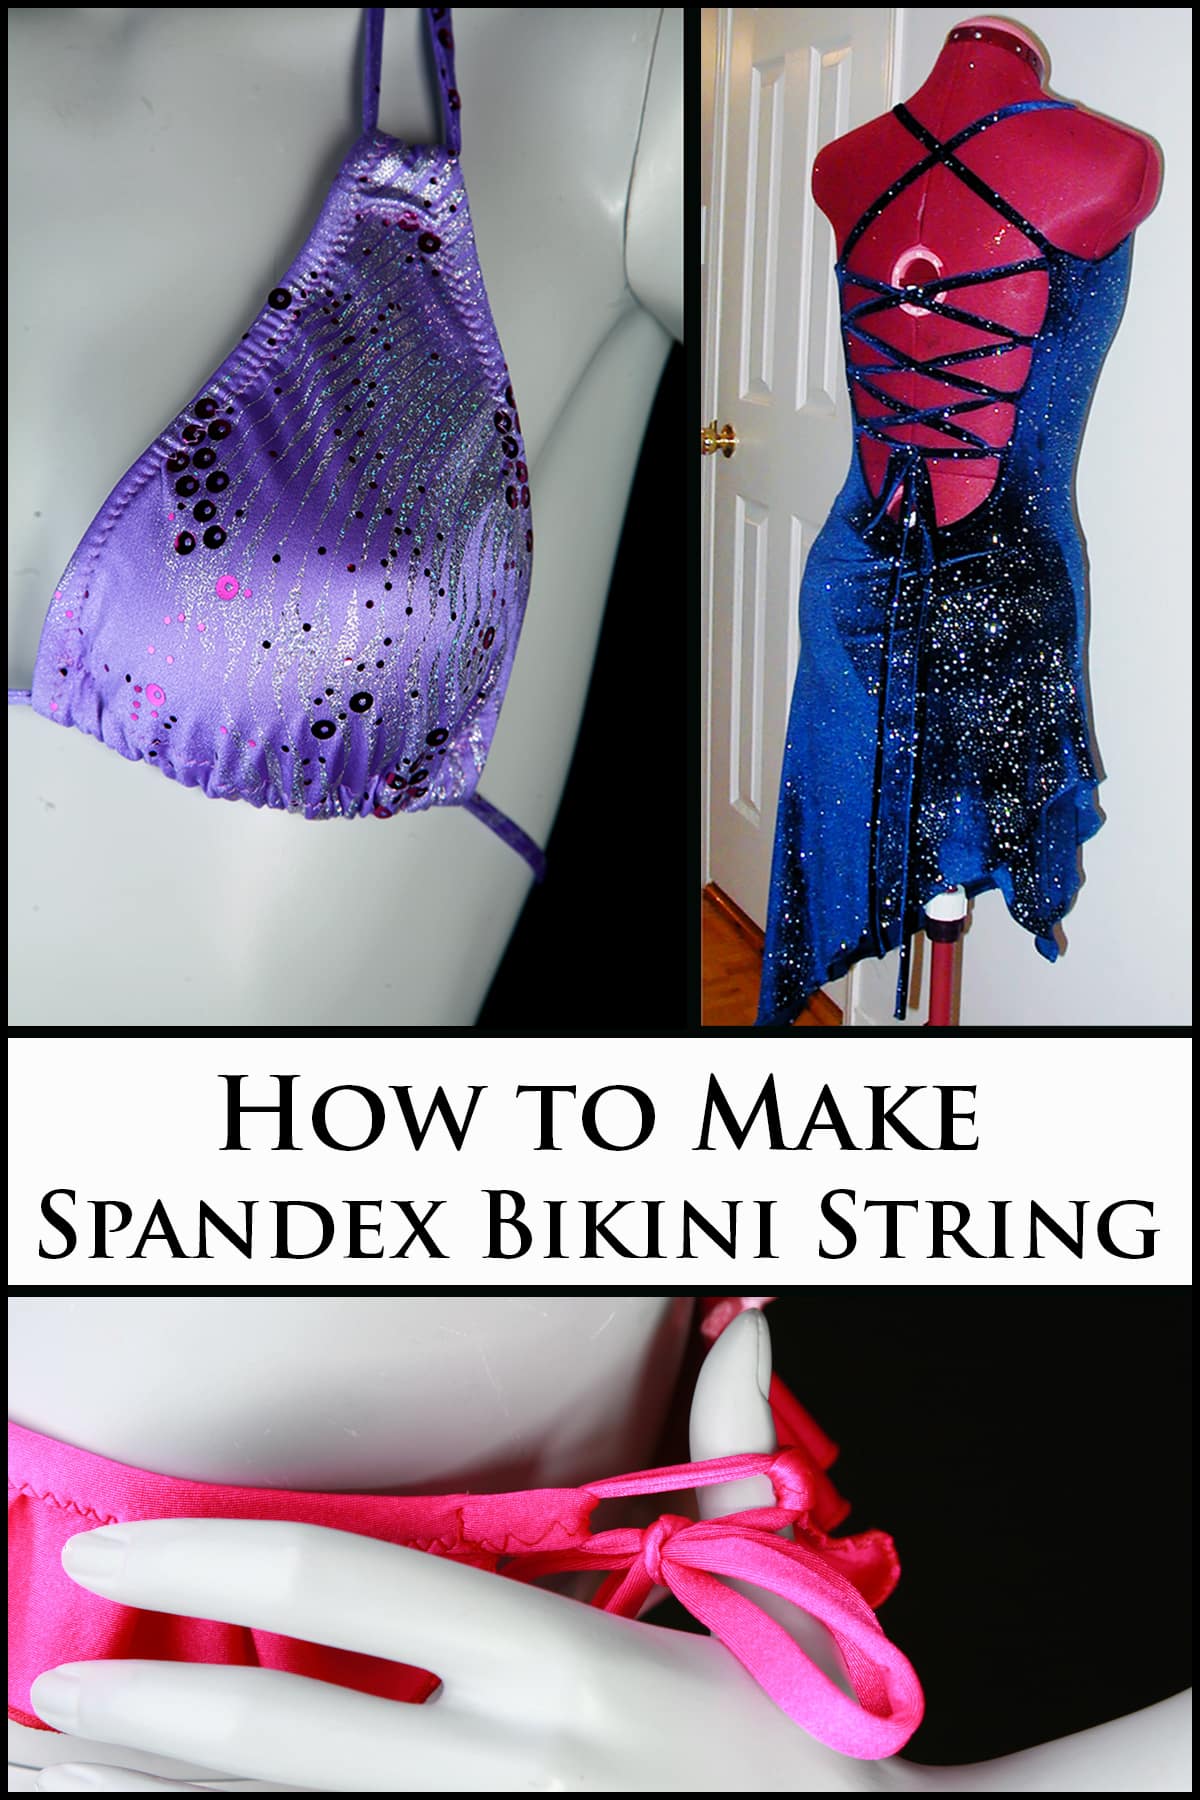 A 3 photo compilation image, labeled how to make bikini string. It shows 3 photos of garments using bikini string, all on mannequins.